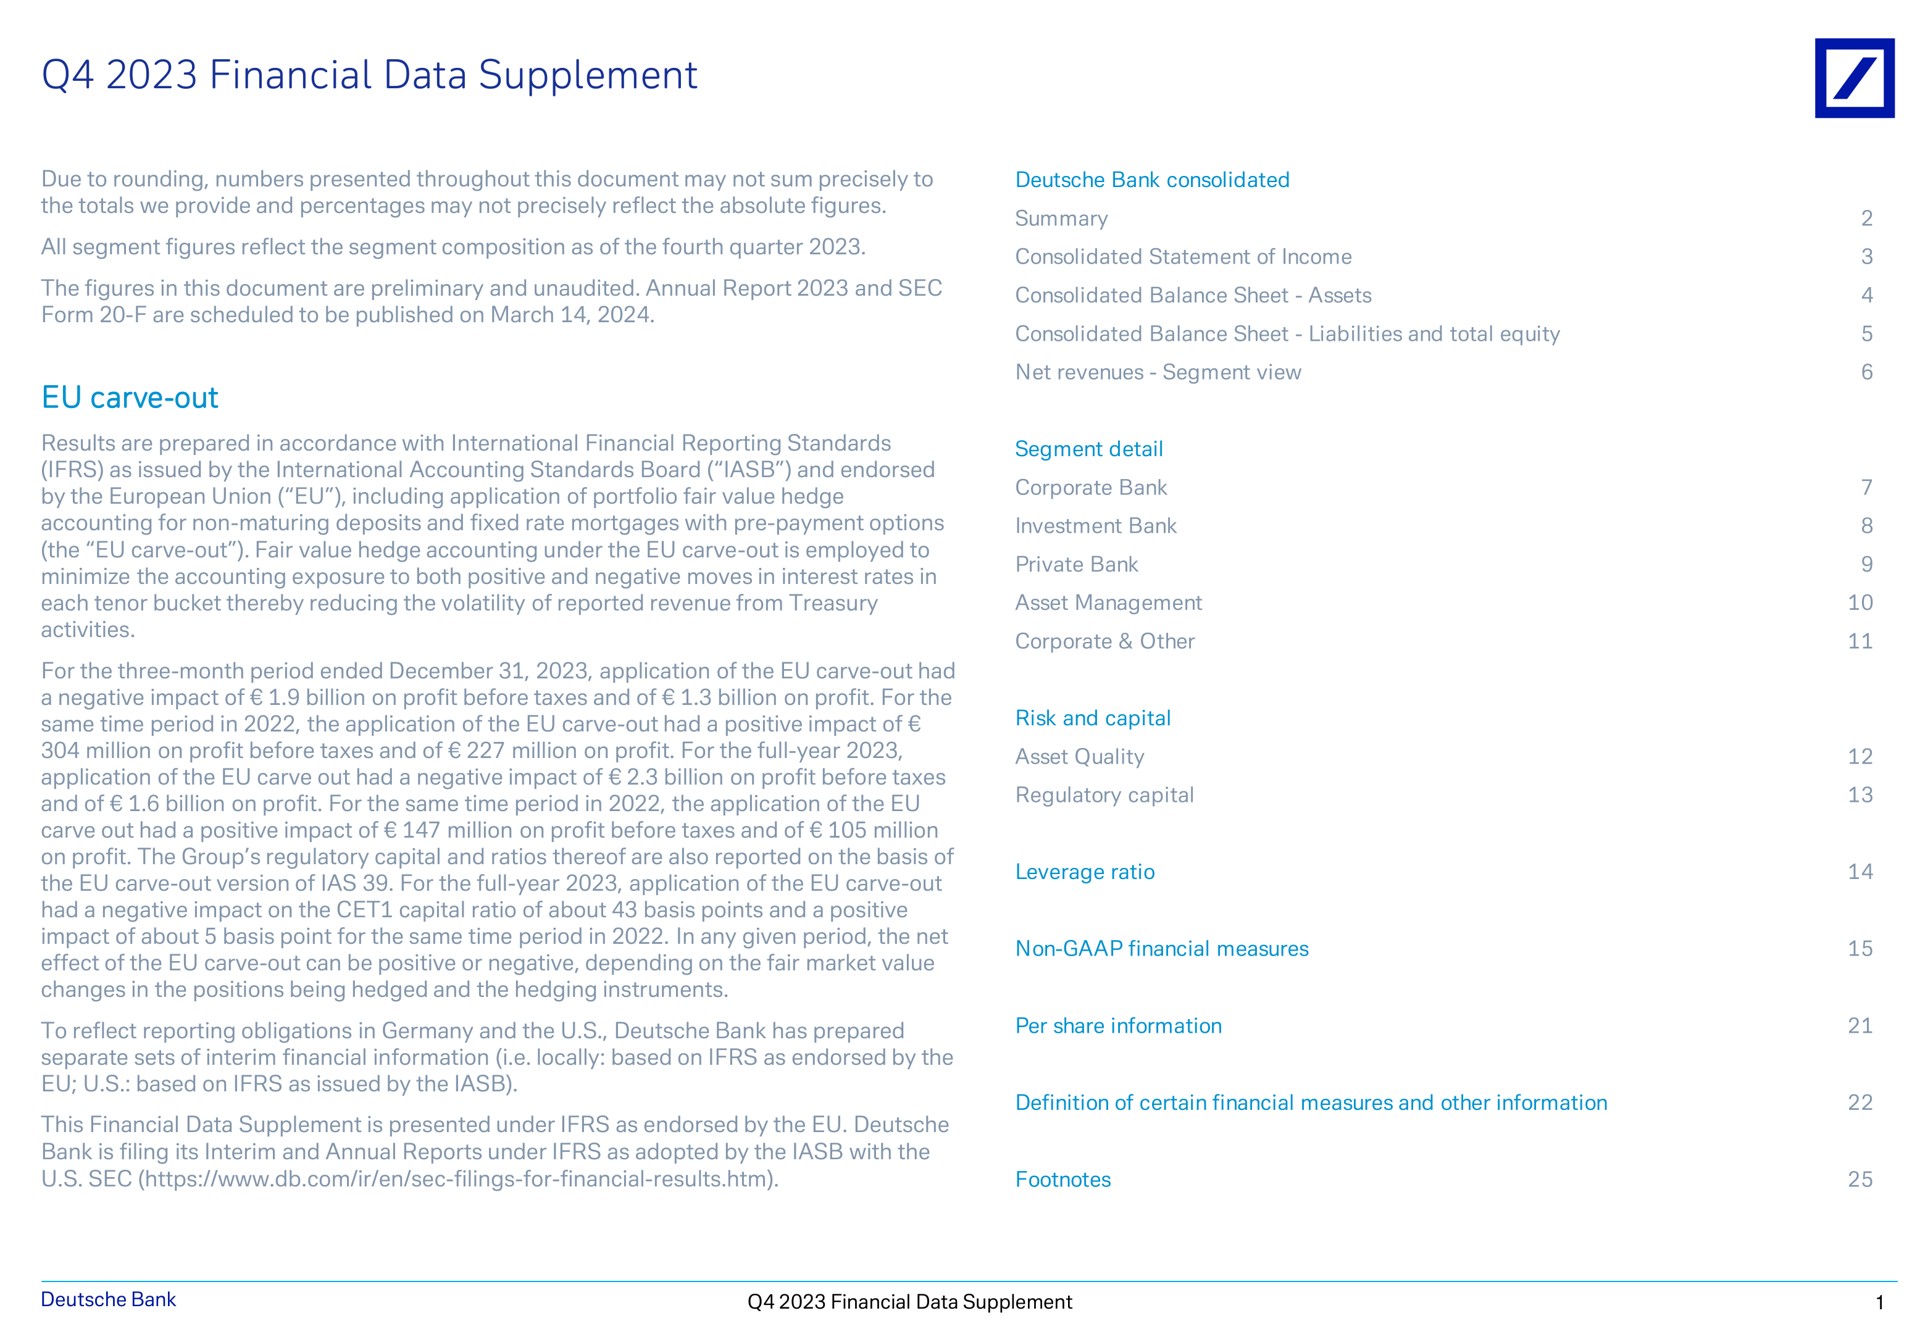 financial data supplement carve out due to rounding numbers presented throughout this document may not sum precisely to the totals we provide and percentages may not precisely reflect the absolute figures all segment figures reflect the segment composition as of the fourth quarter the figures in this document are preliminary and unaudited annual report and sec form are scheduled to be published on march results are prepared in accordance with international reporting standards as issued by the international accounting standards board and endorsed by the union including application of portfolio fair value hedge accounting for non maturing deposits and fixed rate mortgages with payment options the fair value hedge accounting under the is employed to minimize the accounting exposure to both positive and negative moves in interest rates in each tenor bucket thereby reducing the volatility of reported revenue from treasury activities for the three month period ended application of the had a negative impact of billion on profit before taxes and of billion on profit for the same time period in the application of the had a positive impact of million on profit before taxes and of million on profit for the full year application of the carve out had a negative impact of billion on profit before taxes and of billion on profit for the same time period in the application of the carve out had a positive impact of million on profit before taxes and of million on profit the group regulatory capital and ratios thereof are also reported on the basis of the version of for the full year application of the had a negative impact on the capital ratio of about basis points and a positive impact of about basis point for the same time period in in any given period the net effect of the can be positive or negative depending on the fair market value changes in the positions being hedged and the hedging instruments to reflect reporting obligations in and the bank has prepared separate sets of interim information i locally based on as endorsed by the based on as issued by the bank consolidated summary consolidated statement of income consolidated balance sheet assets consolidated balance sheet liabilities and total equity net revenues segment view segment detail corporate bank investment bank private bank asset management corporate other risk and capital asset quality regulatory capital leverage ratio non measures per share information definition of certain measures and other information this is presented under as endorsed by the bank is filing its interim and annual reports under as adopted by the with the sec footnotes a | Deutsche Bank